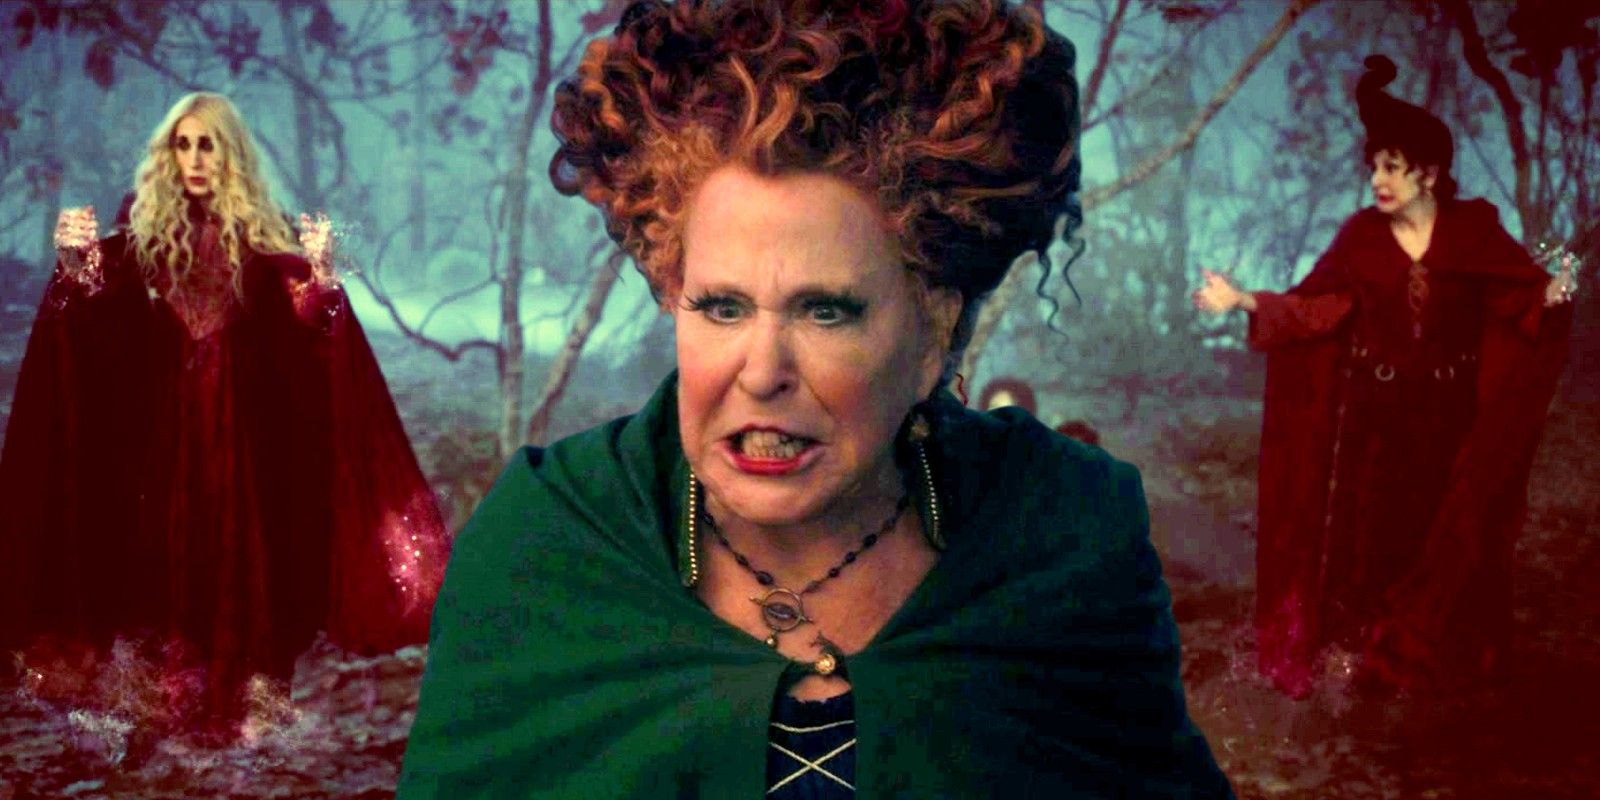 An angry Winifred with Sarah and Mary behind her in Hocus Pocus 2